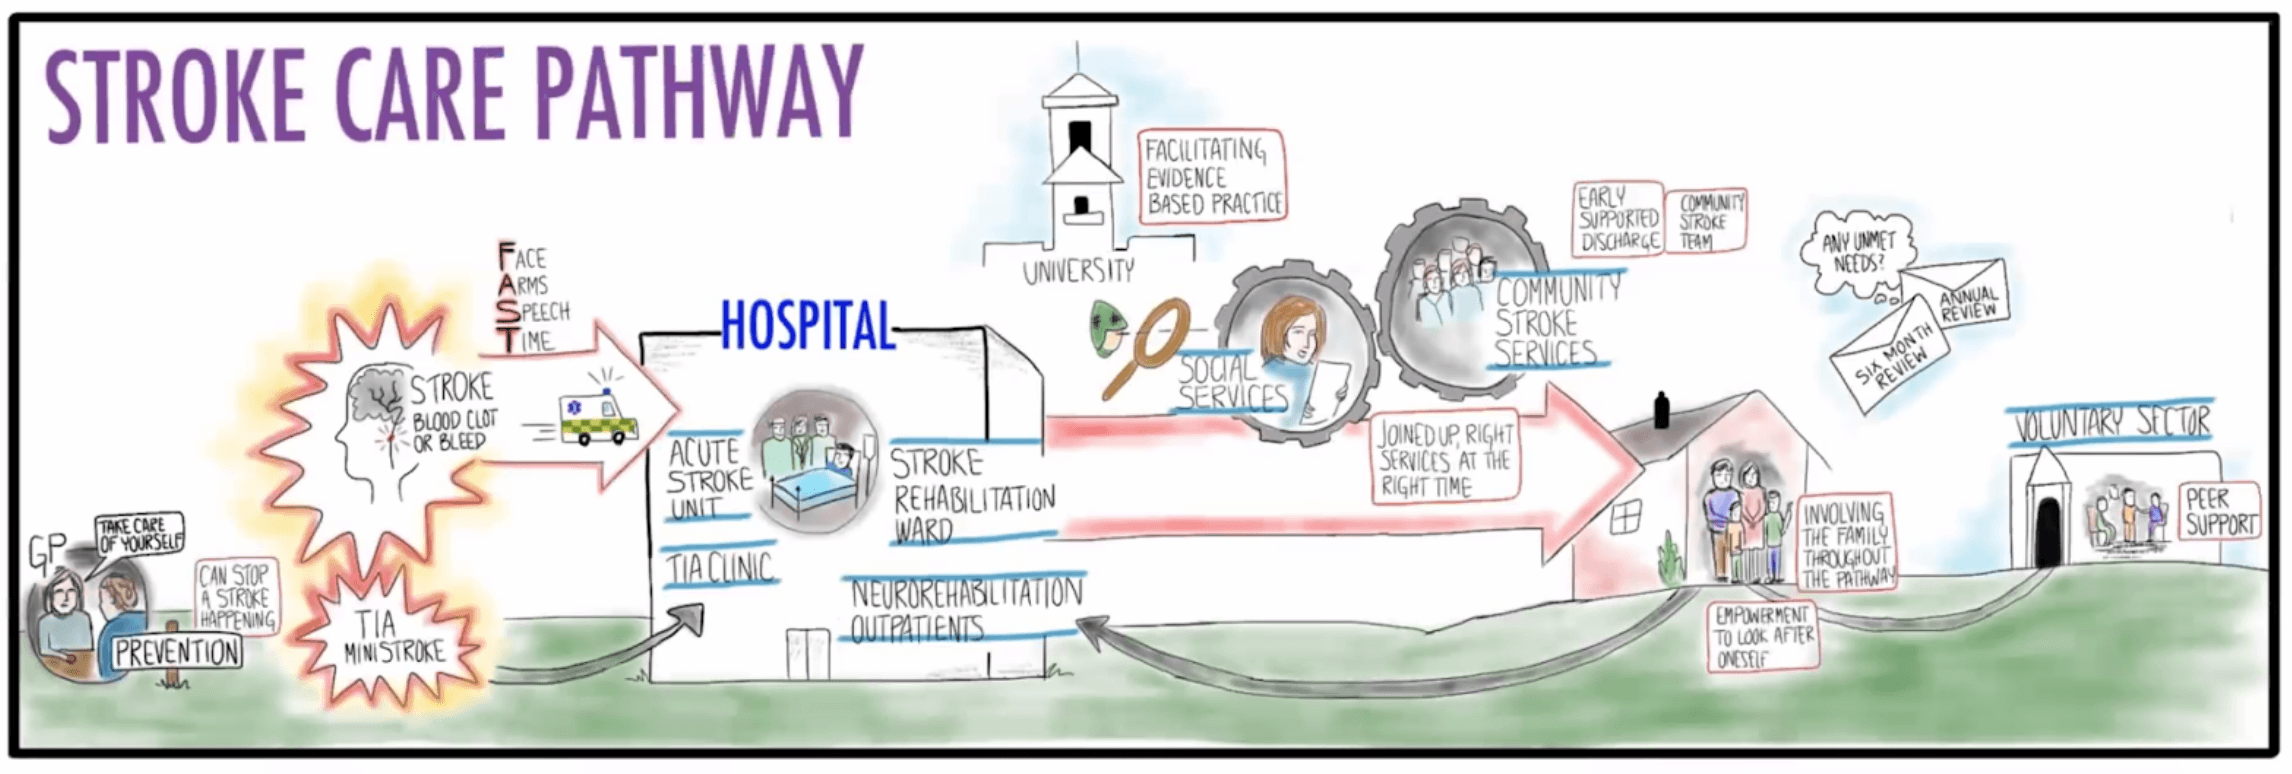 "Pathway for Stroke Care"